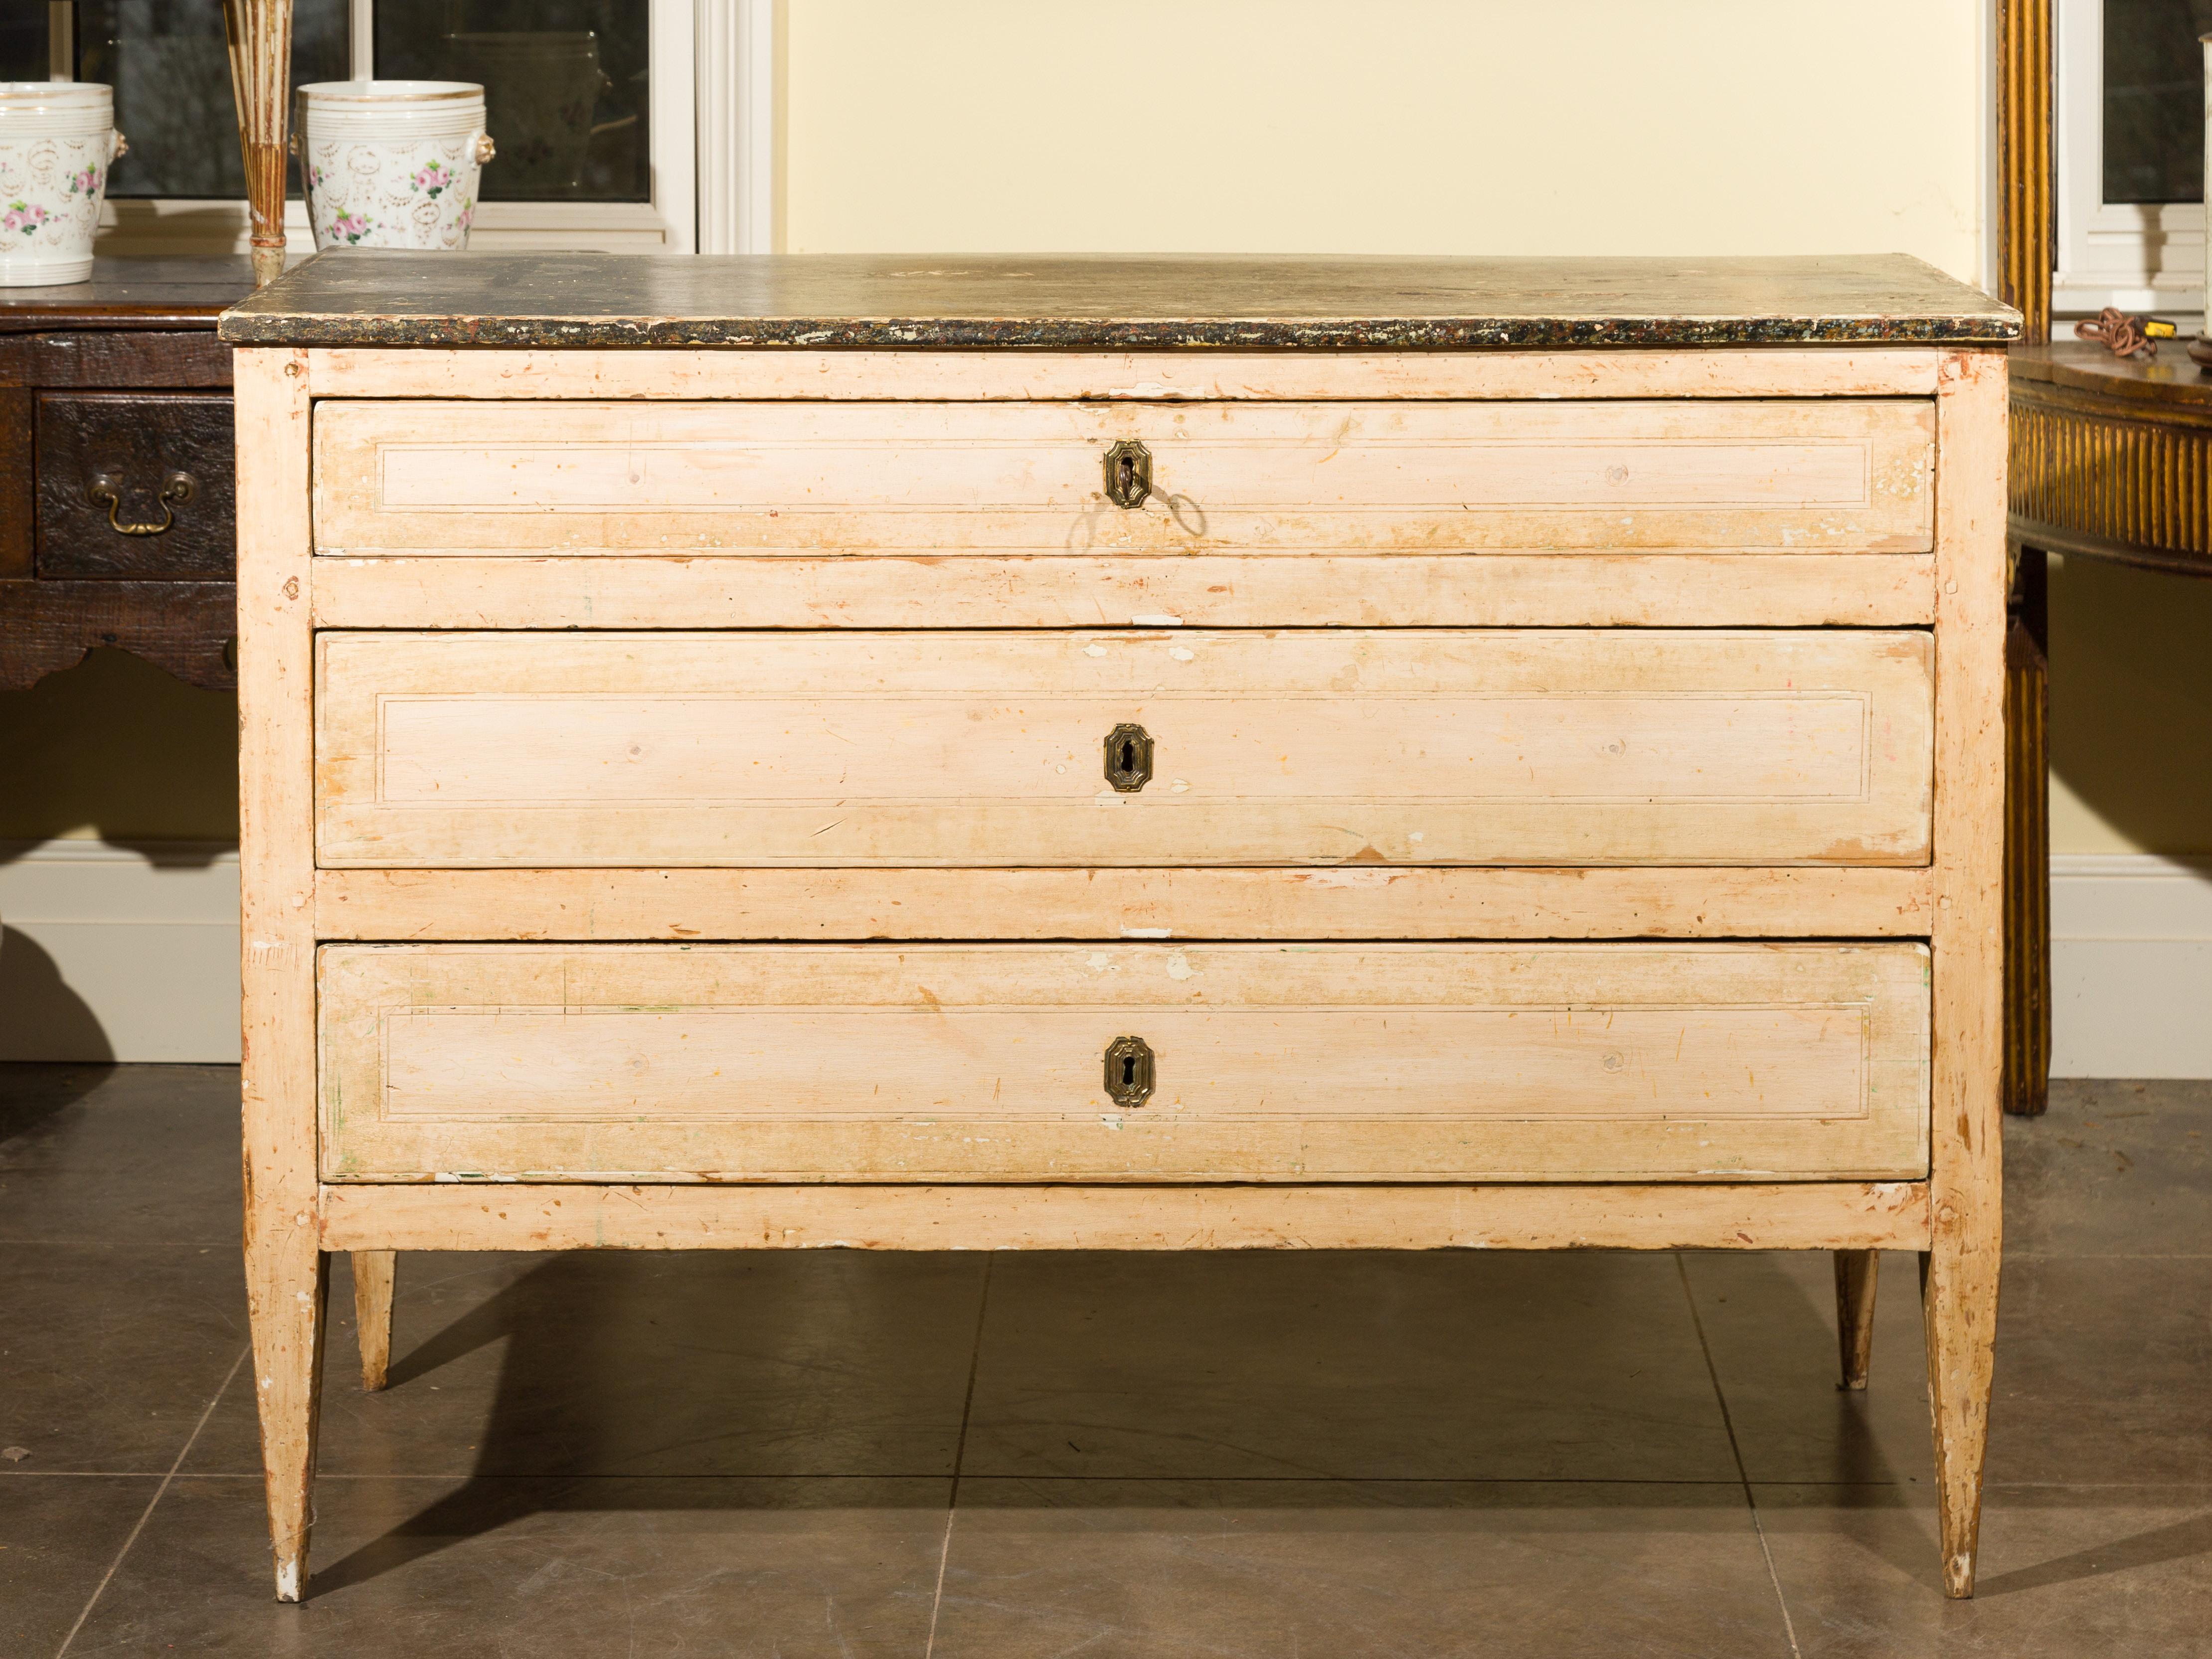 Neoclassical Italian Painted Wood Three-Drawer Commode with Tapered Legs, circa 1800